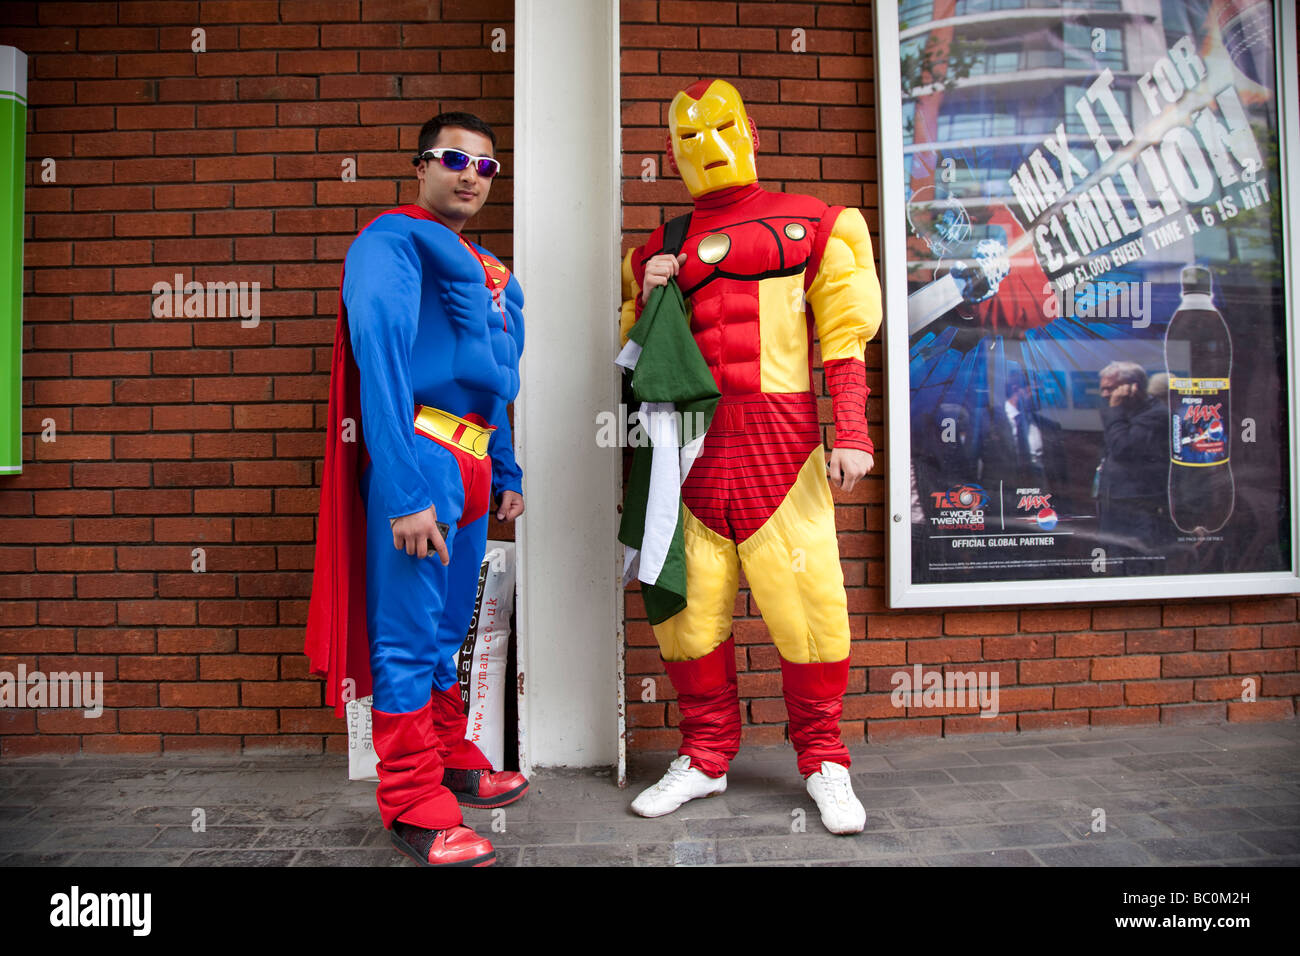 Fans dressed in fancy dress during the ICC World Twenty20 Final between Pakistan and Sri Lanka at Lord's. Stock Photo